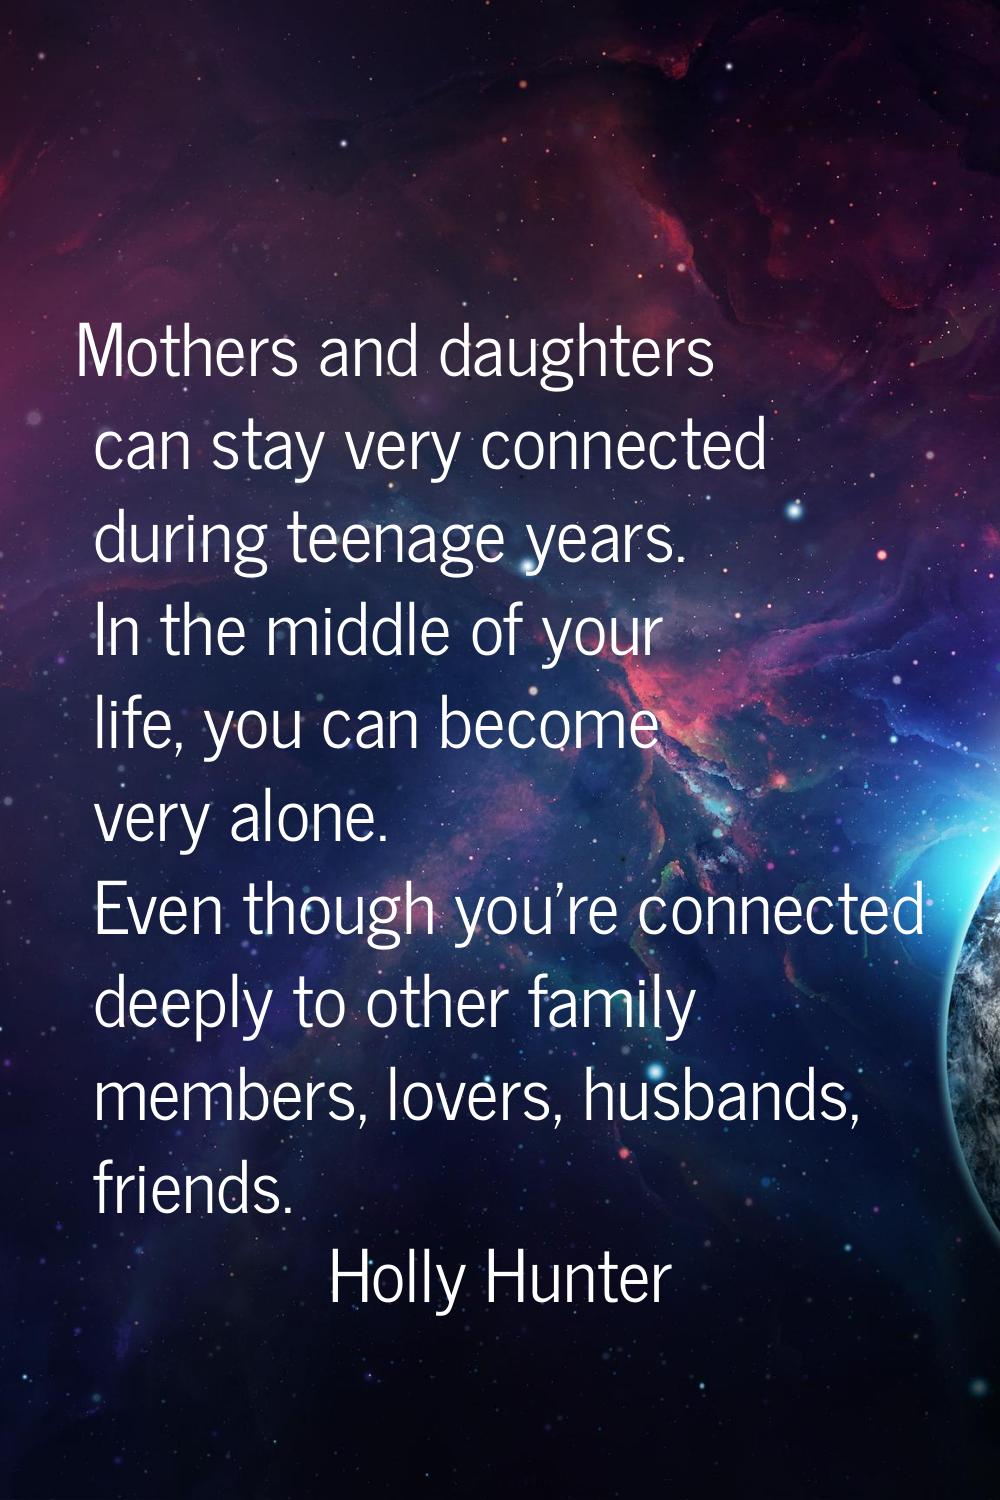 Mothers and daughters can stay very connected during teenage years. In the middle of your life, you